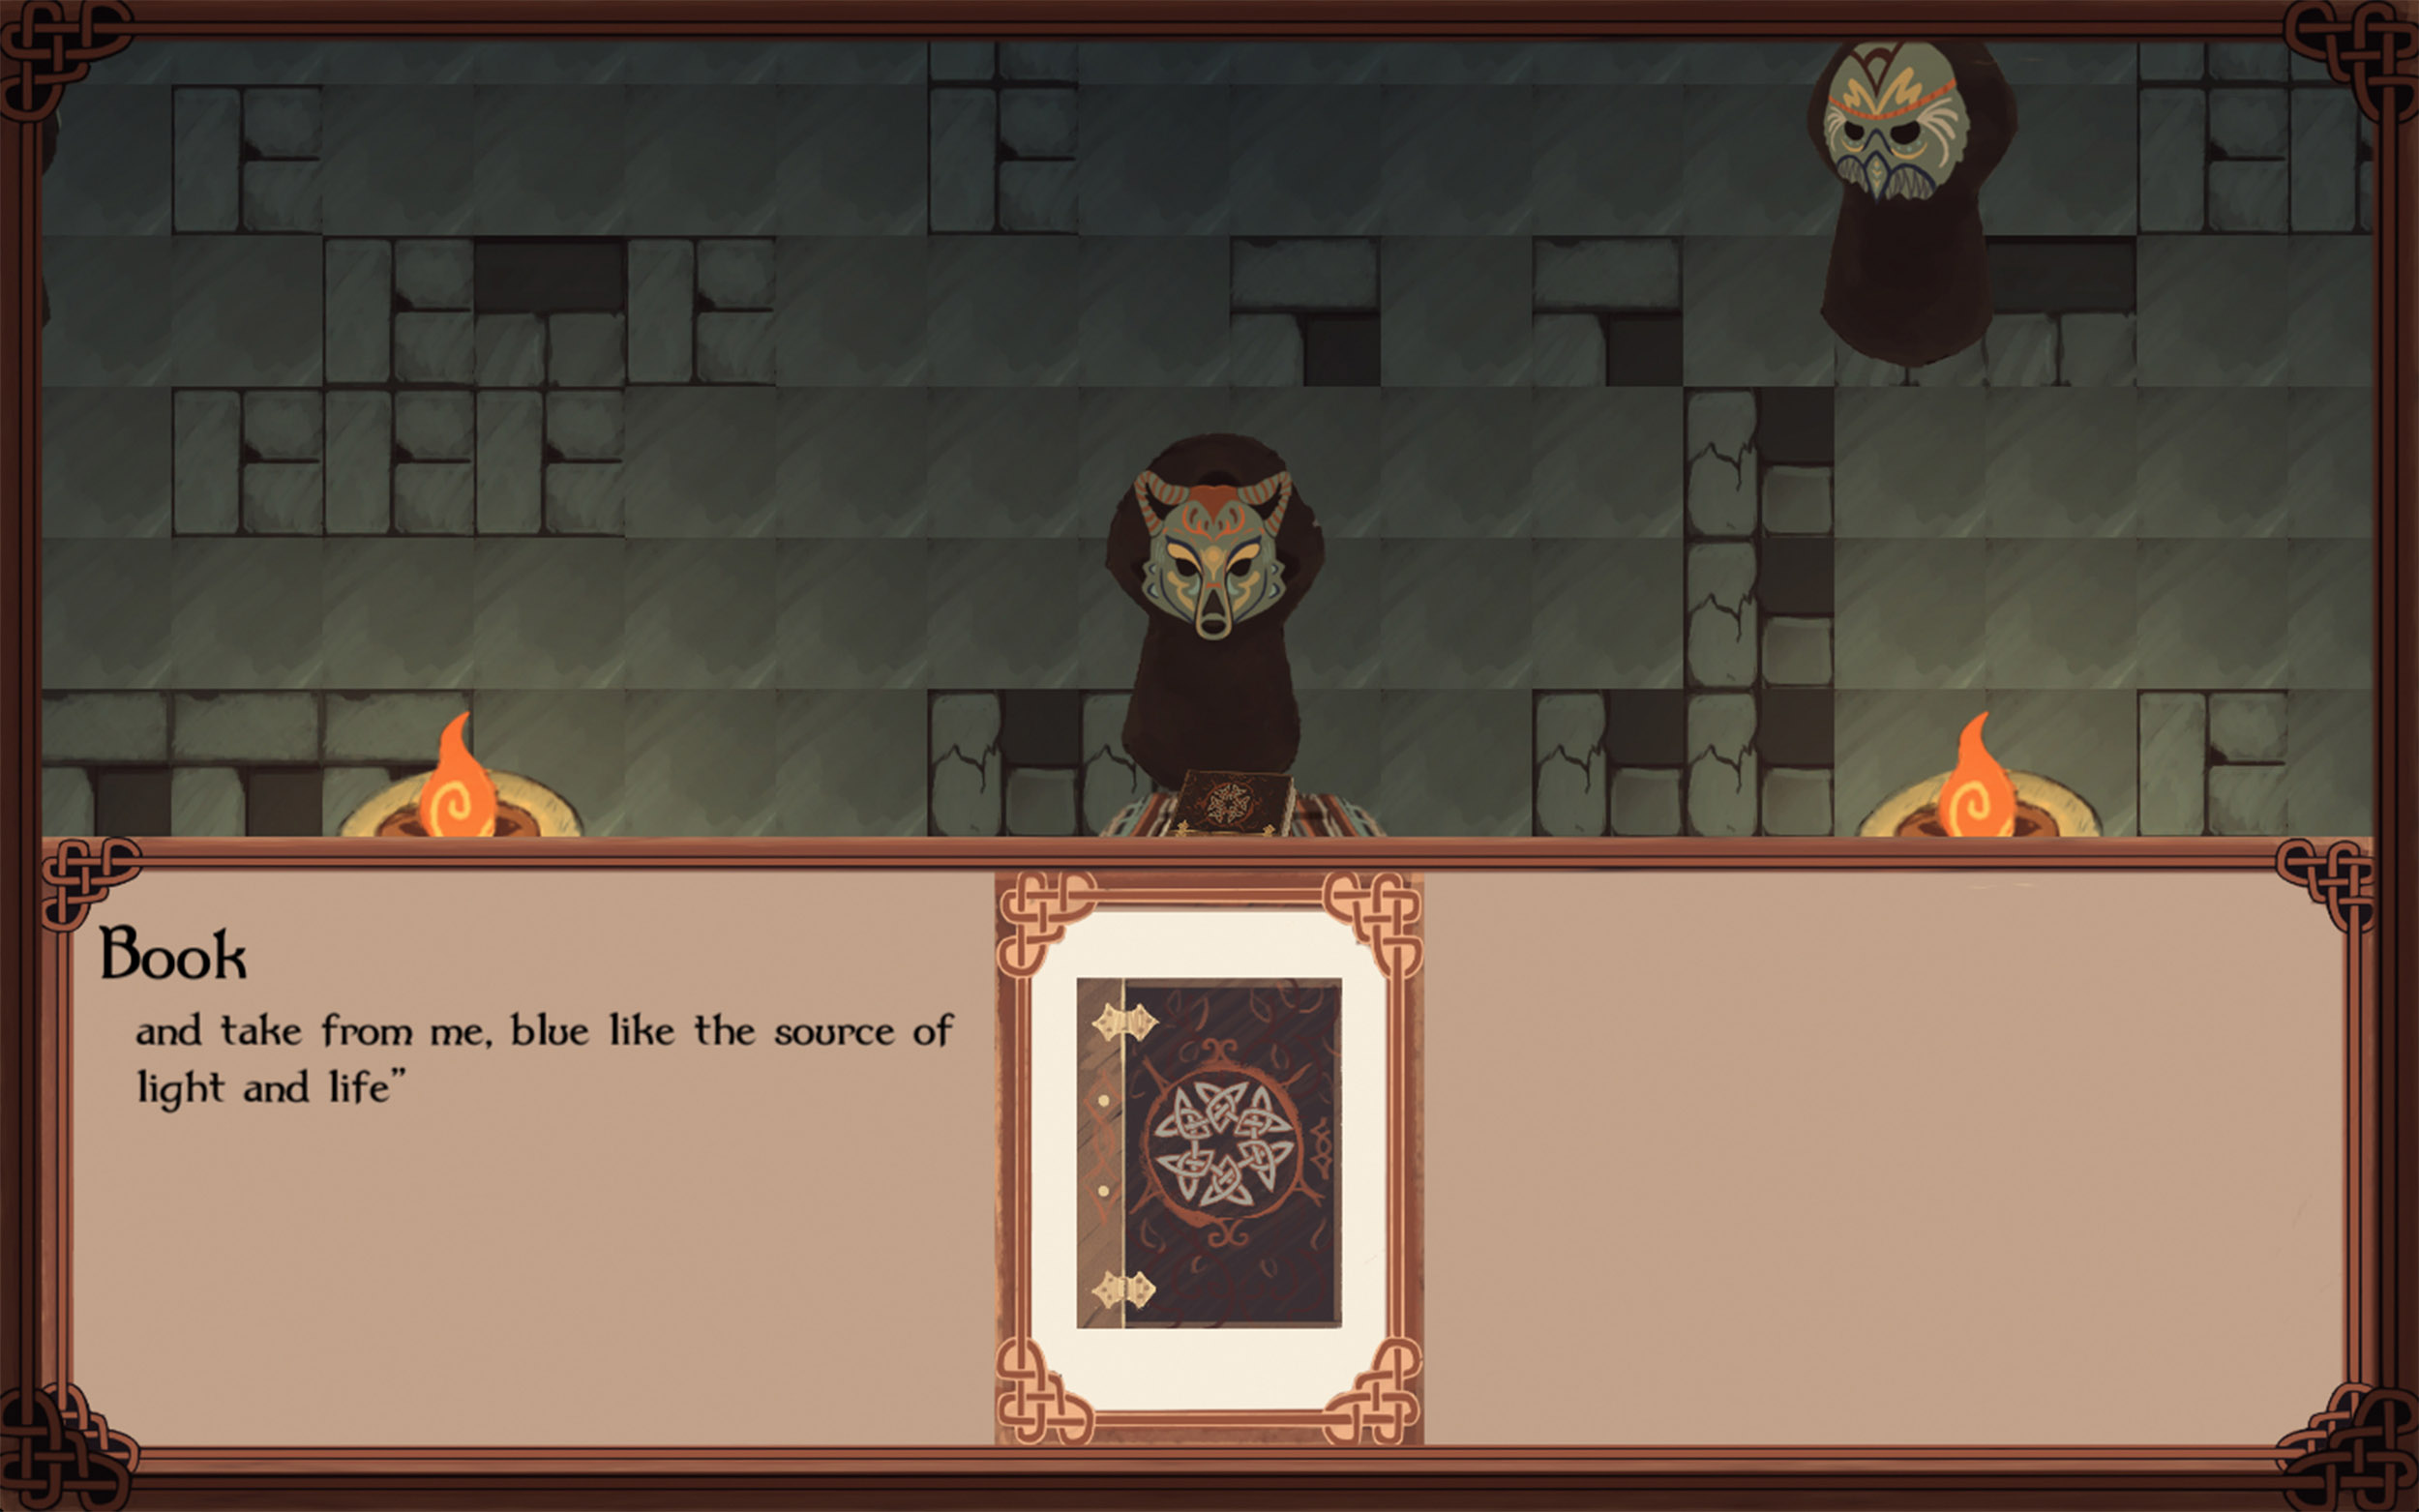 View full size version of a screenshot of gameplay, where a character interacts with a book